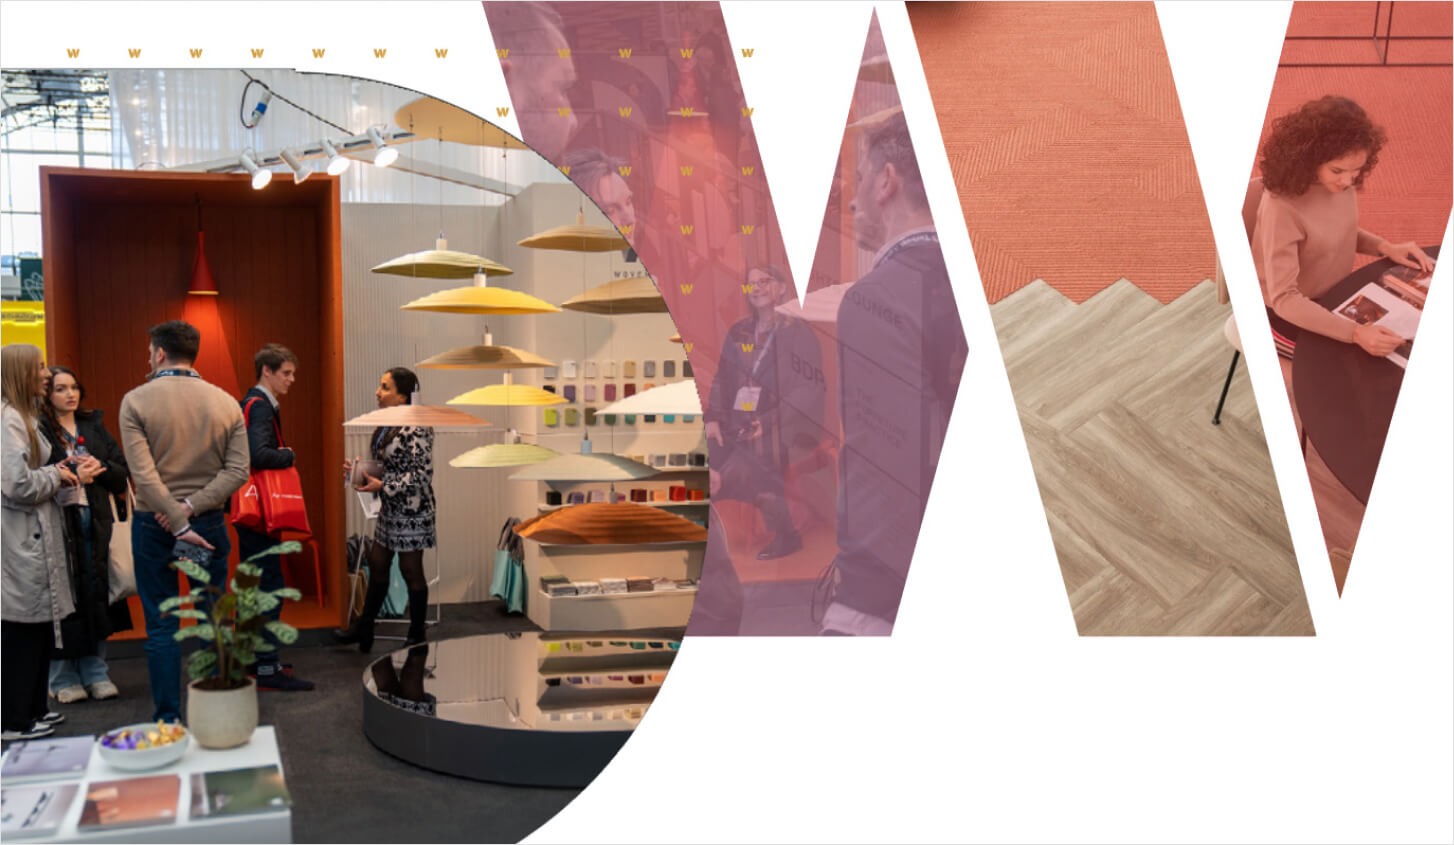 Join us at the Workspace Design Show - The UK’s leading workspace interiors event at the Building Design Centre, London